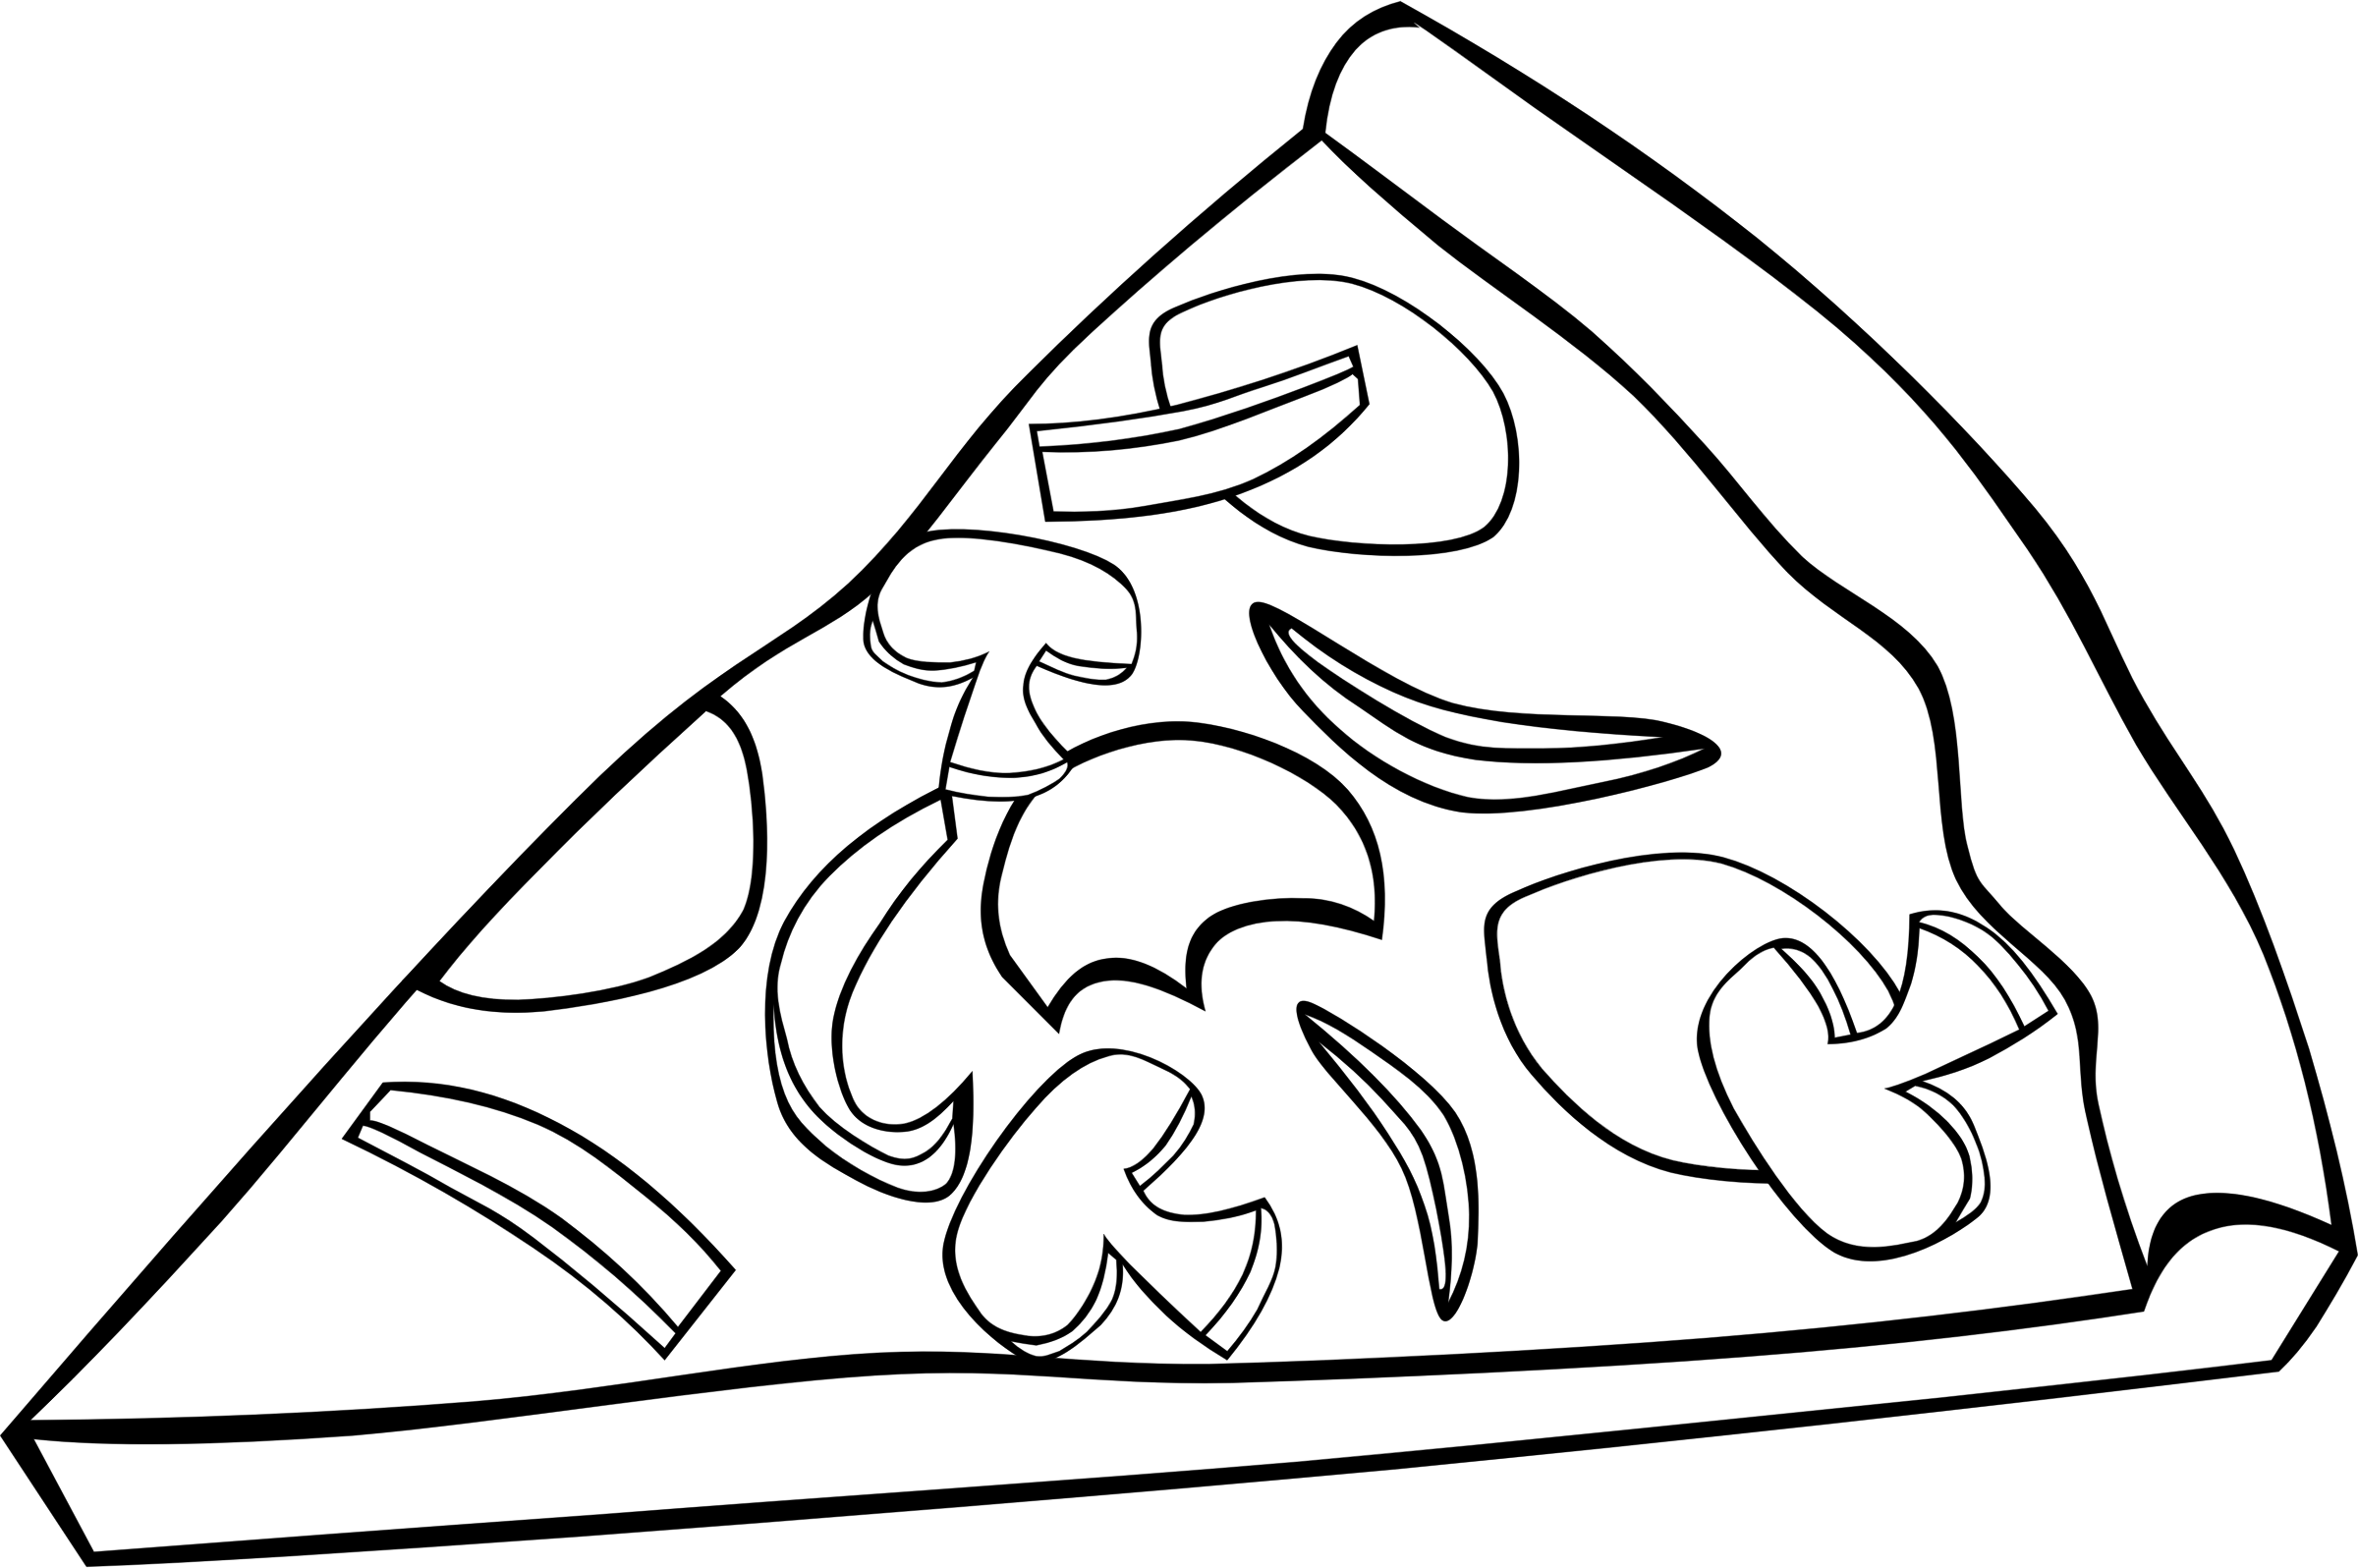 Meal clipart black and white